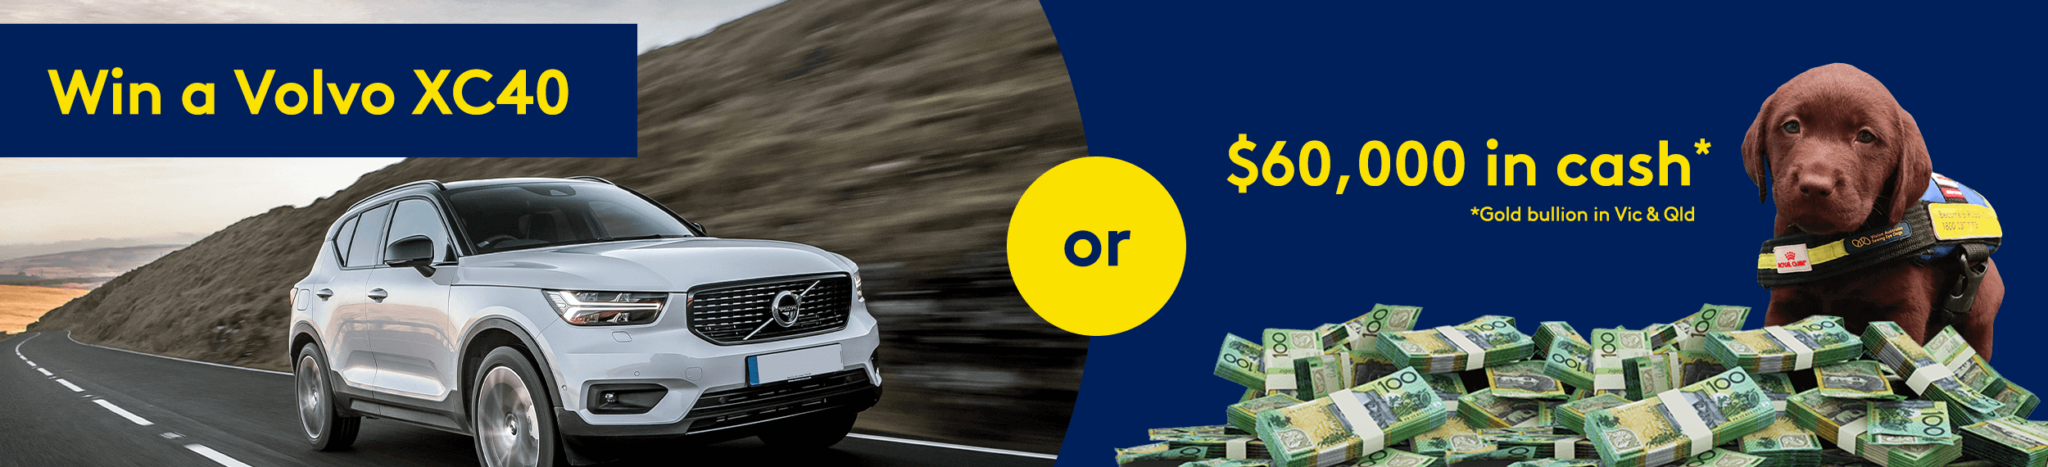 Win a Volvo XC40 or $60,000 in cash